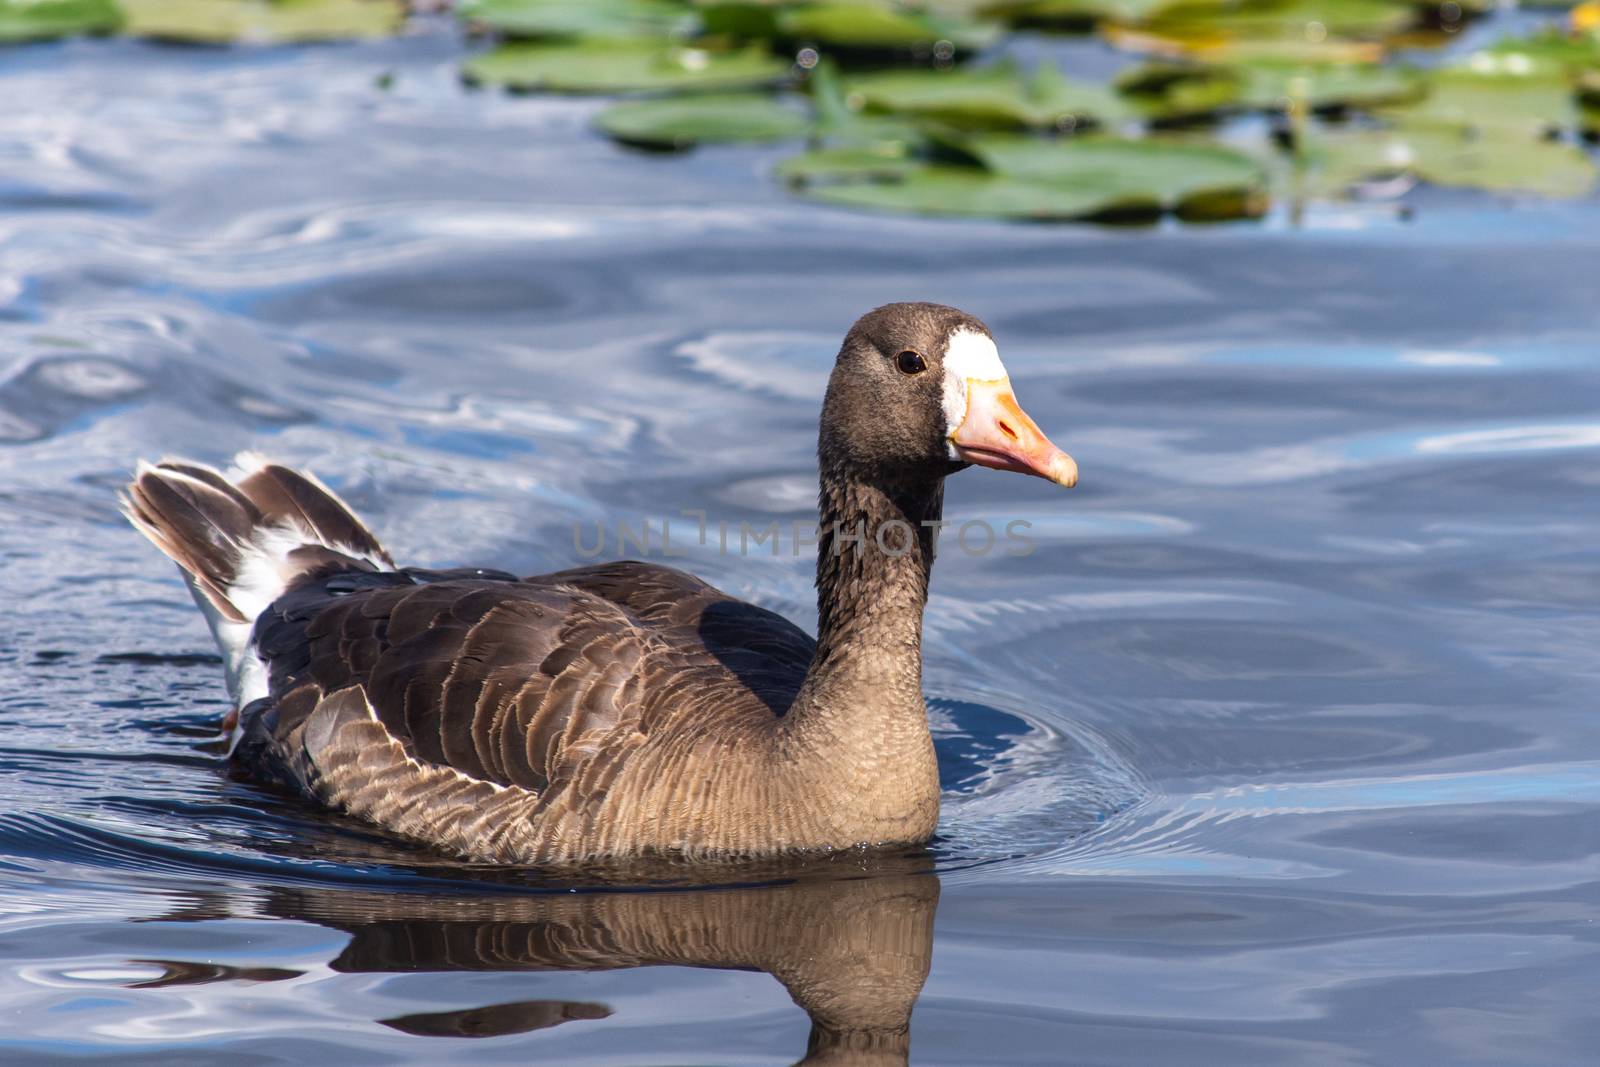 The greylag goose (Anser anser) is a species of large goose in t by kingmaphotos